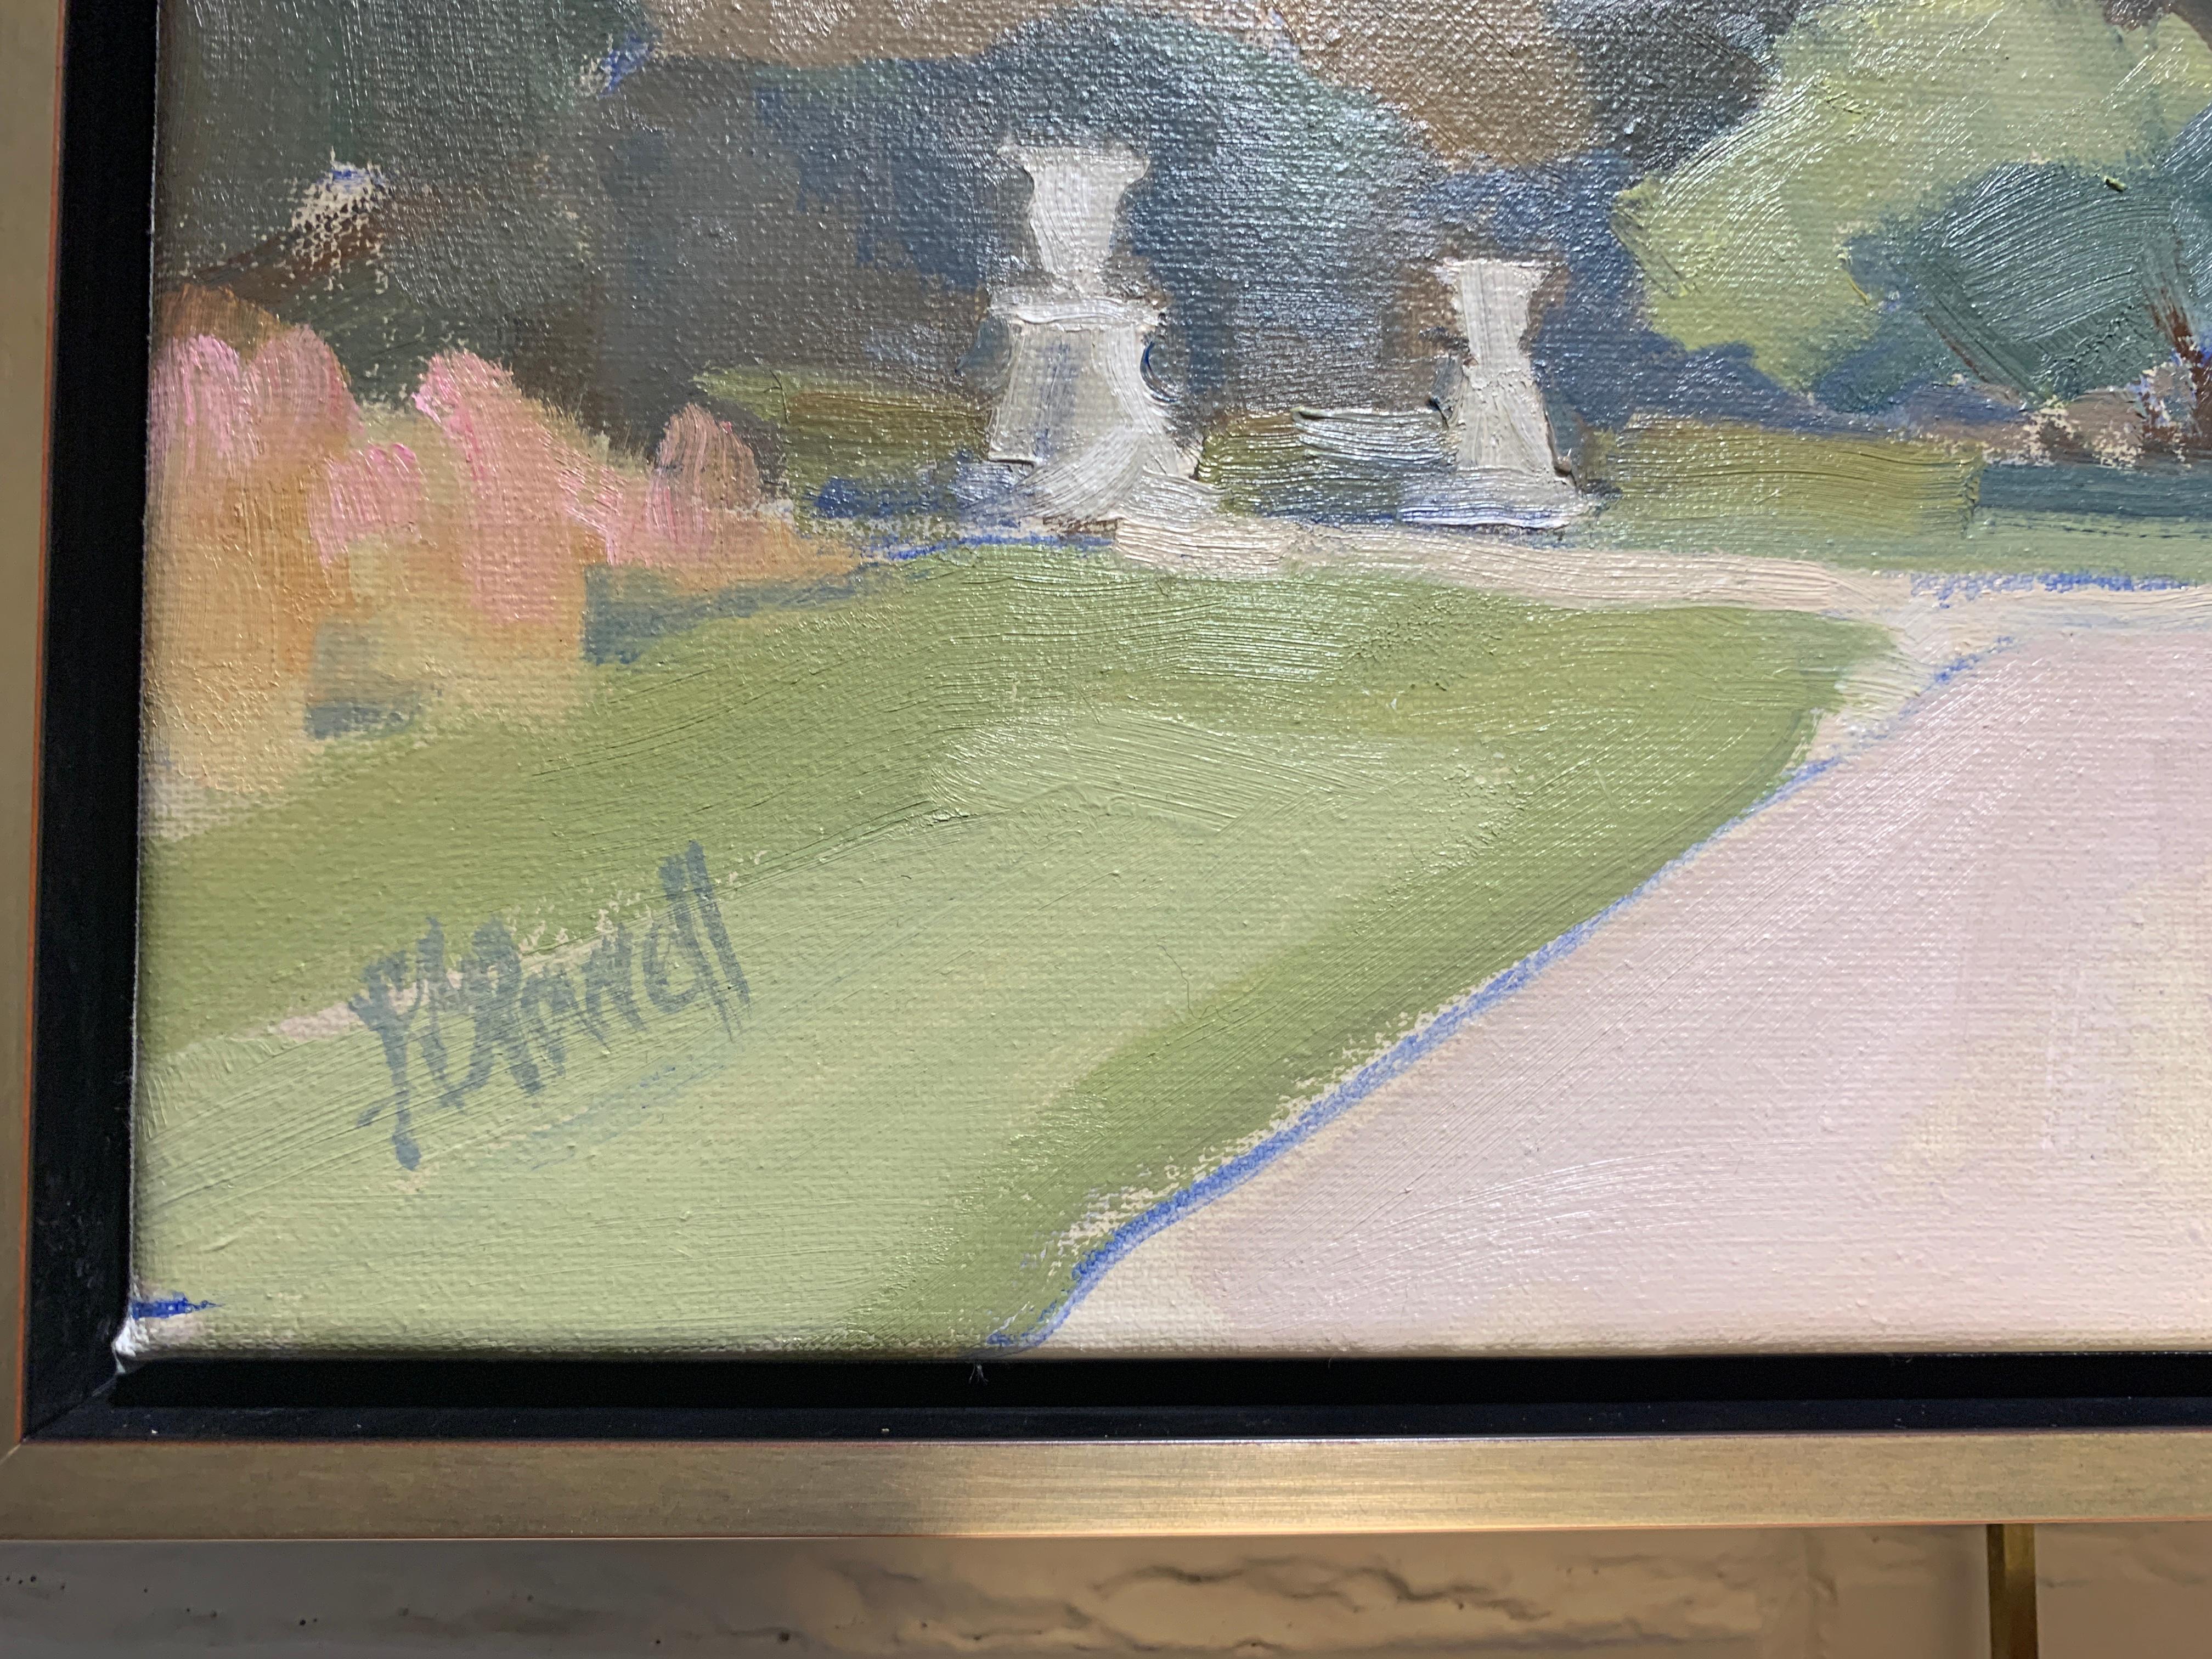 'Louvre, from the Tuileries' is a petite Post-Impressionist framed oil on linen landscape painting created by American artist Lesley Powell in 2019. Featuring a soft palette mostly made of brown and green colors, accented with delicate blue and pink